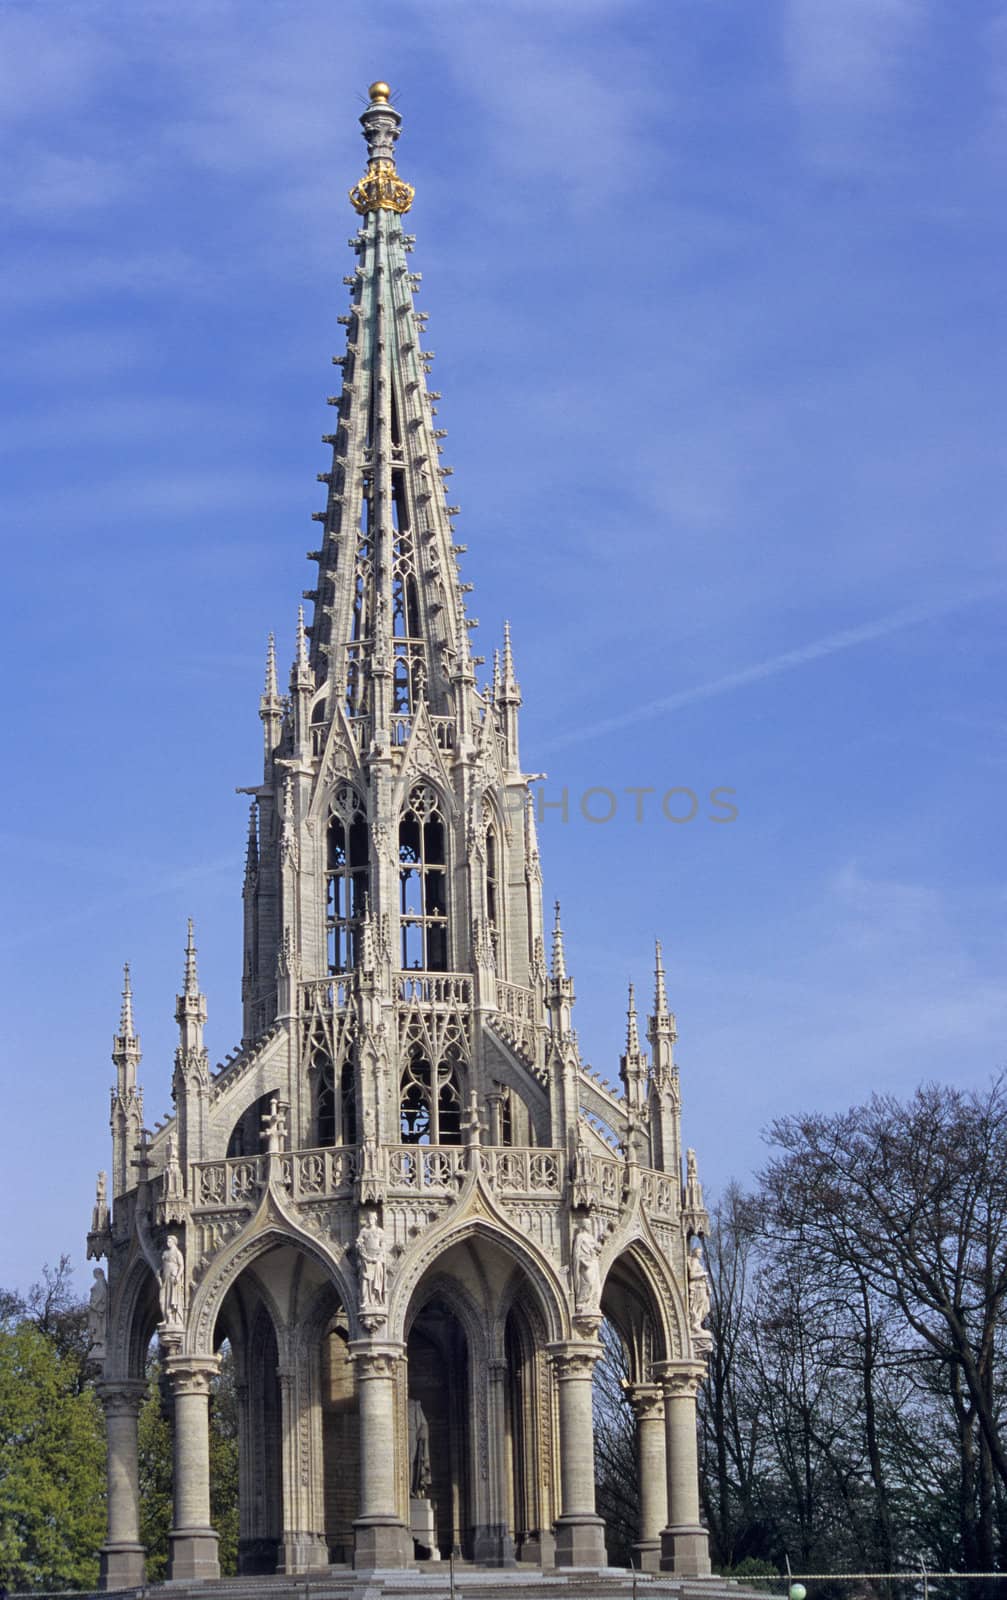 The Monument of the Dynasty in Laeken (Brussels) Belgium is a gothic tribute to Leopold the first, unveiled in 1880 for the fiftieth anniversary of Belgium's Independence.